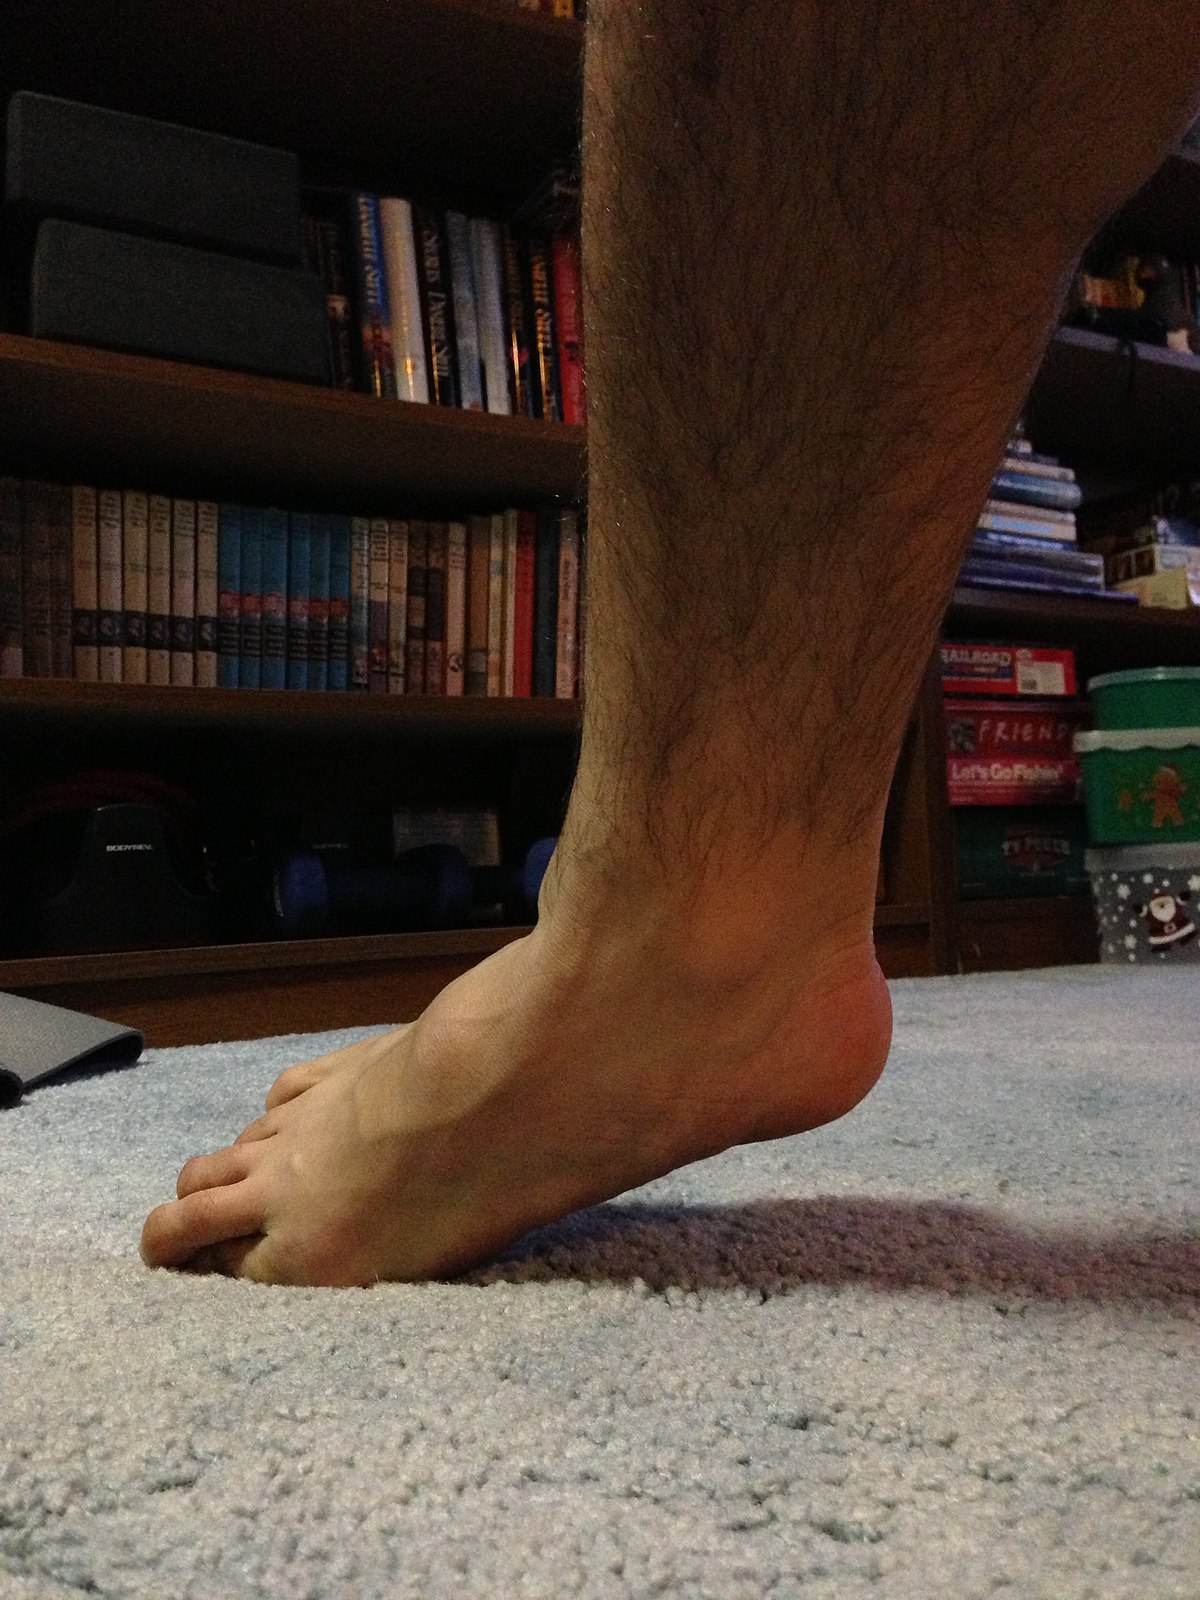 File:Ankle Eversion.JPG - Wikipedia